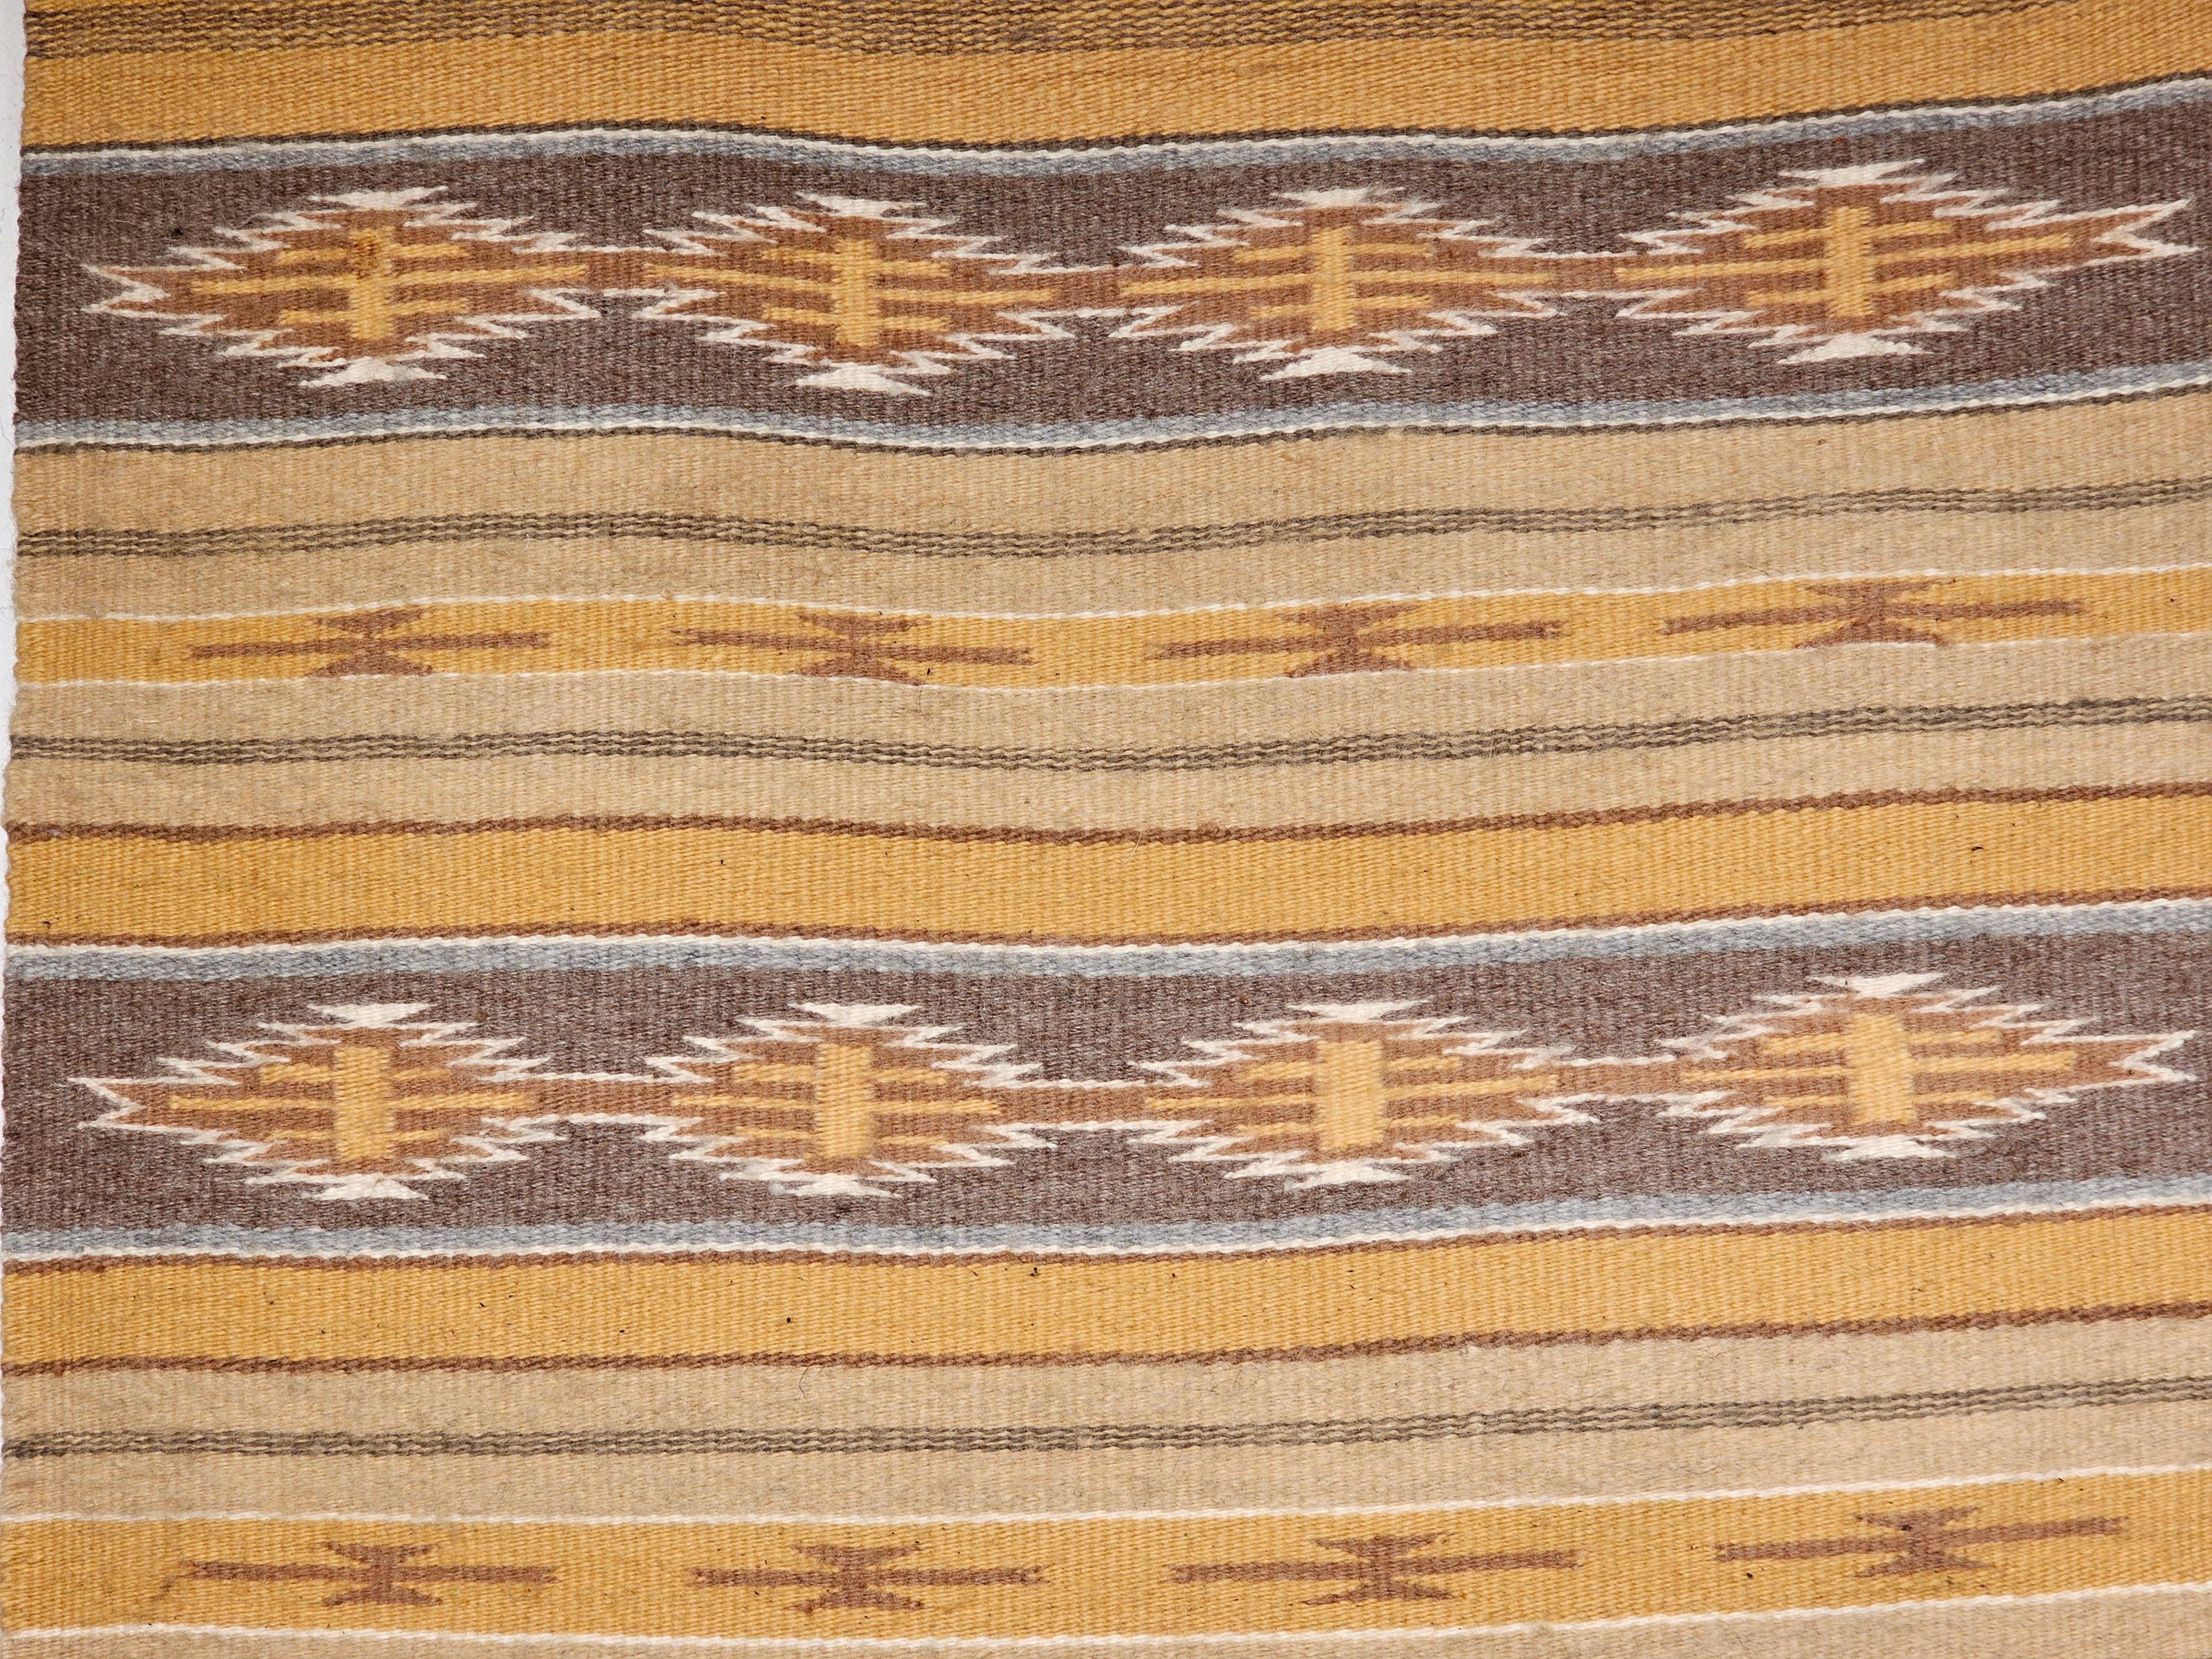 Hand-Knotted Vintage Navajo Rug in Stripe Pattern in Earth Tones Brown, Caramel, Ivory, Gray